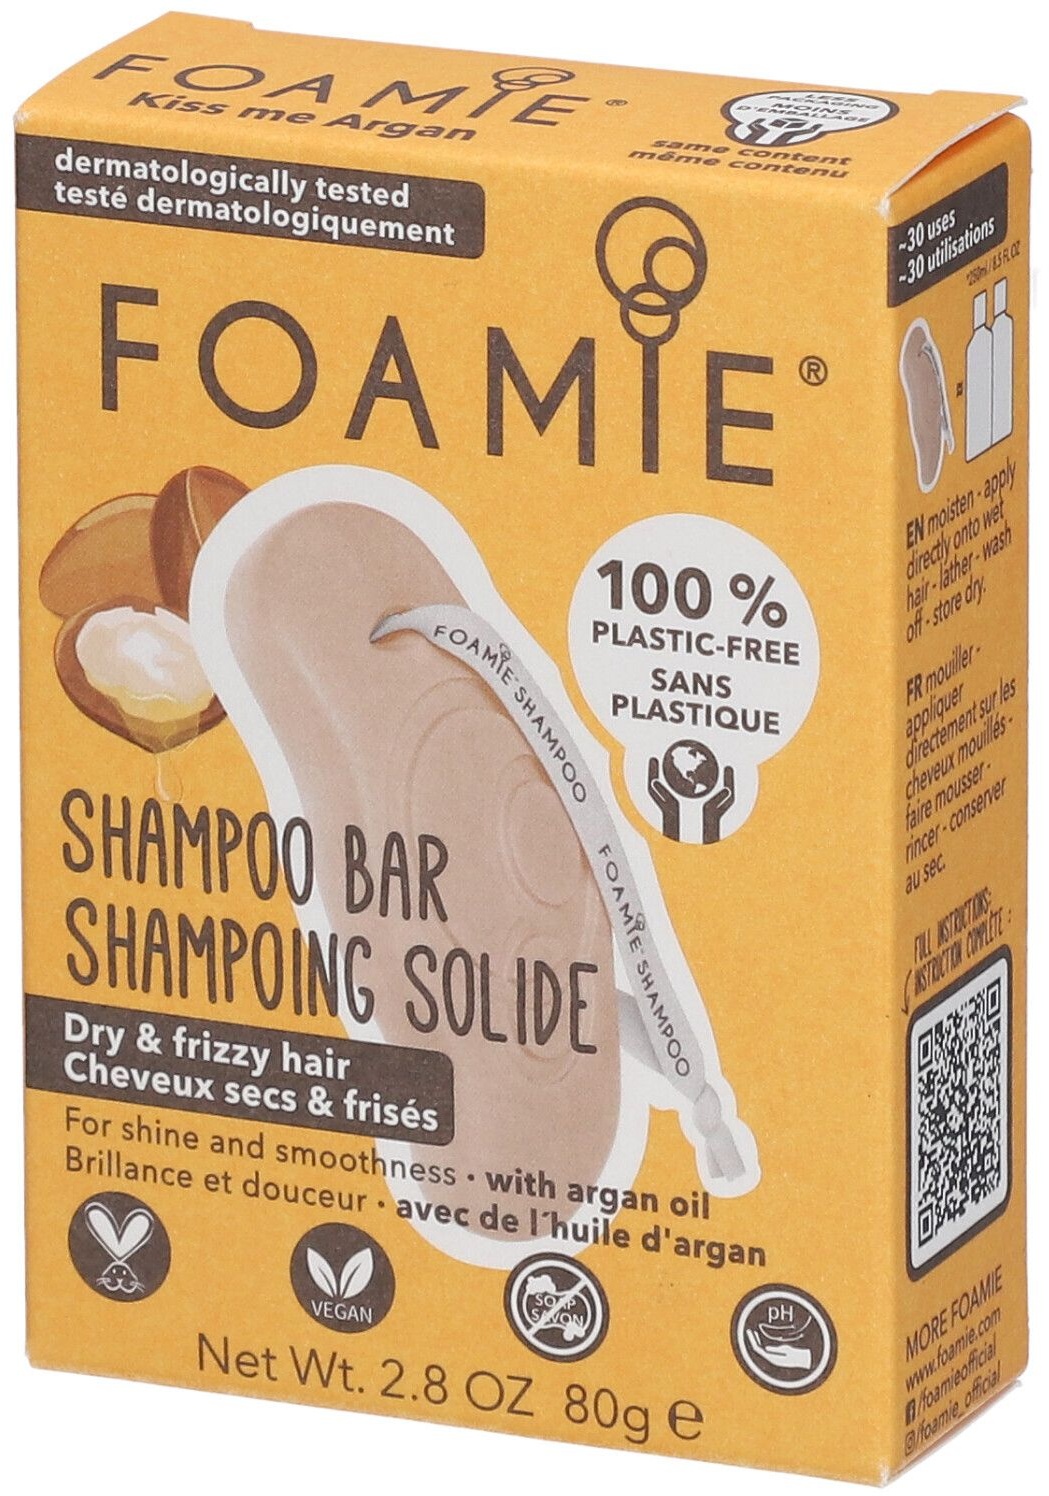 FOAMIE® SHAMPOING SOLIDE Kiss Me Argan 80 g shampooing